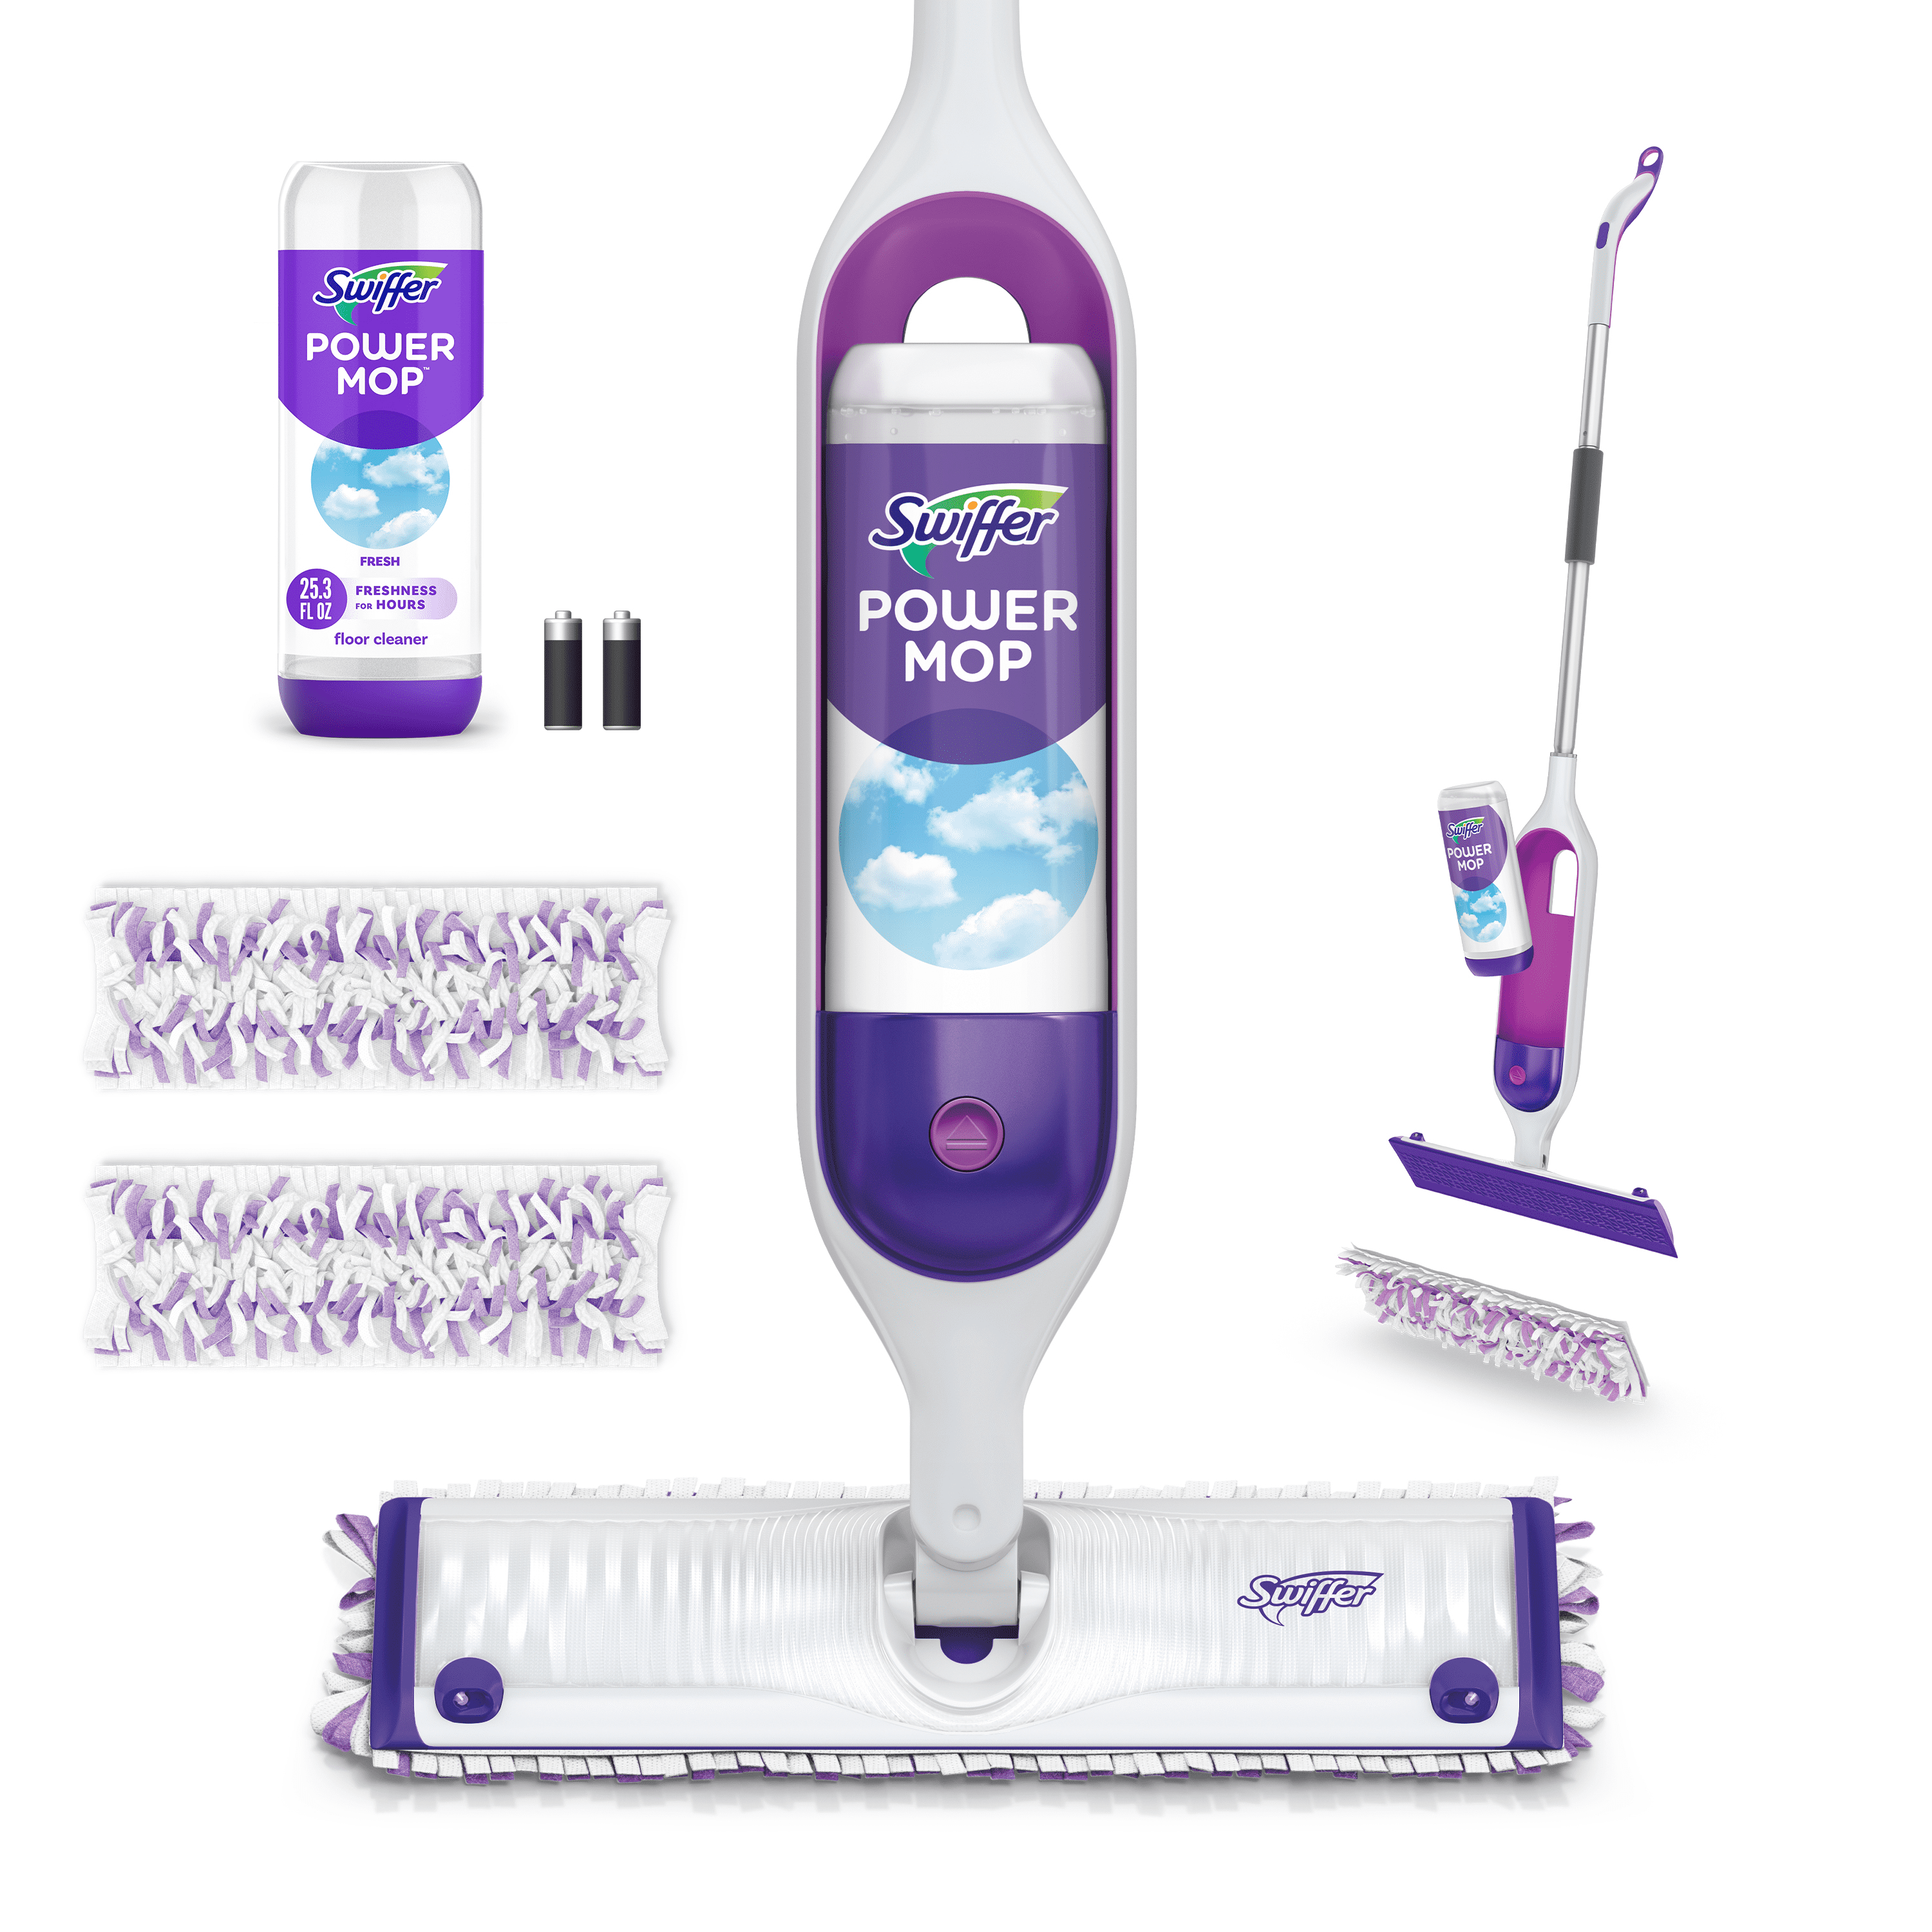 Swiffer Multi-Surface Mop Kit for Cleaning, Scent - Walmart.com